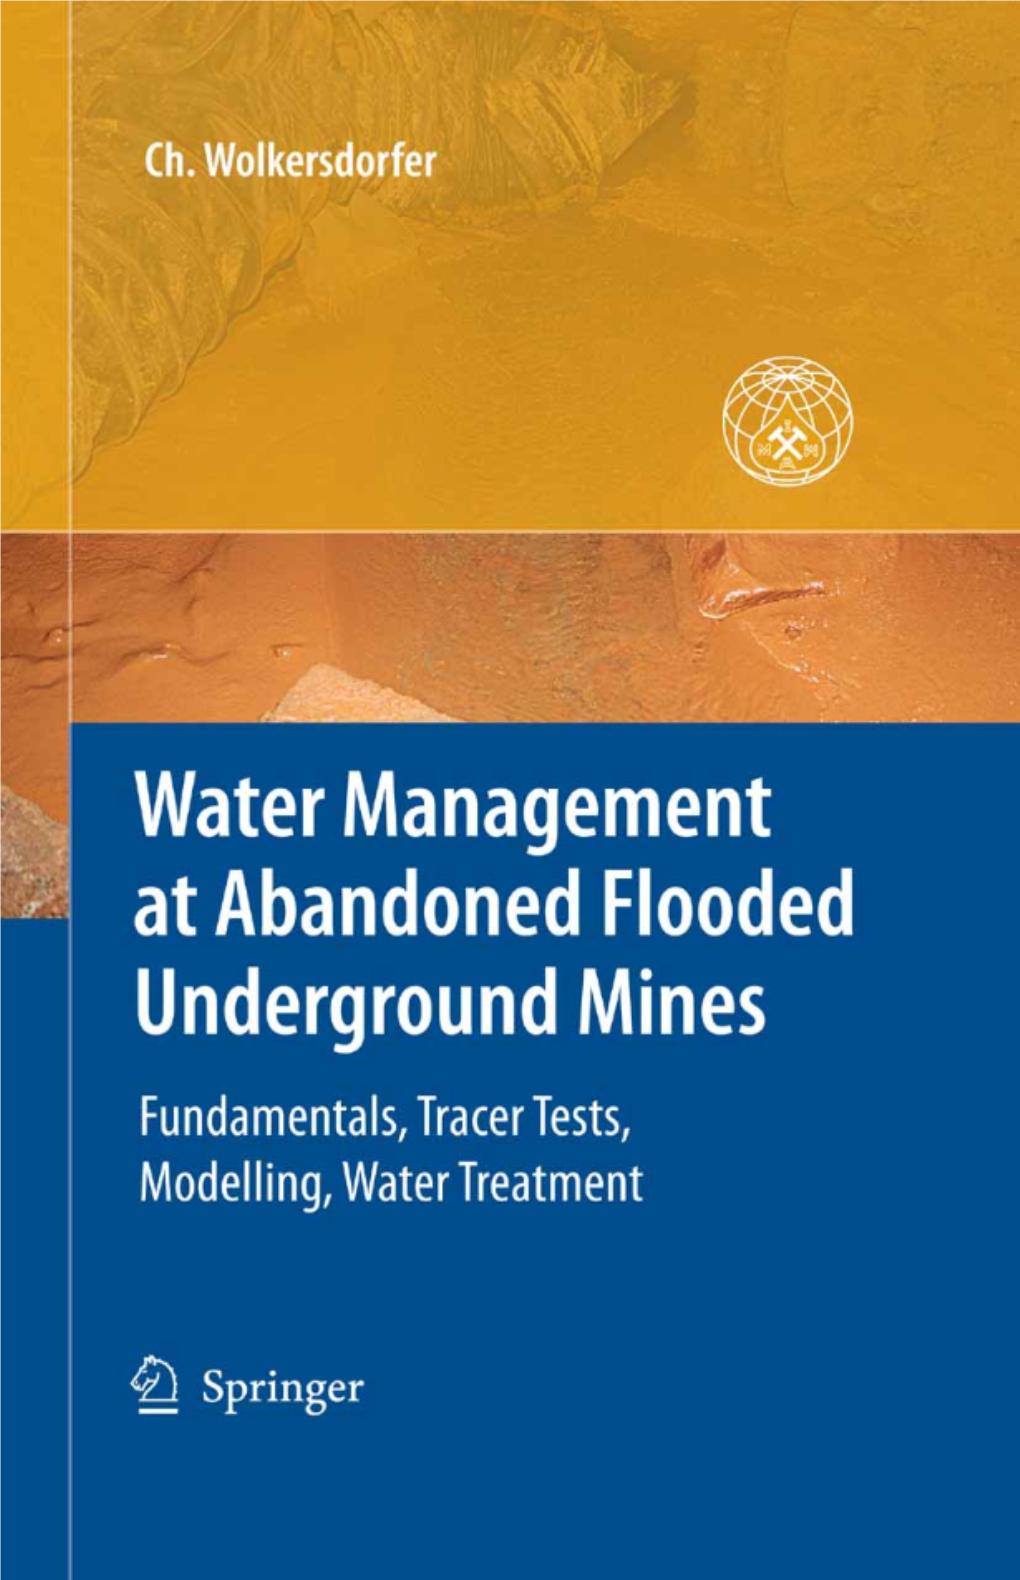 Water Management at Abandoned Flooded Underground Mines Christian Wolkersdorfer